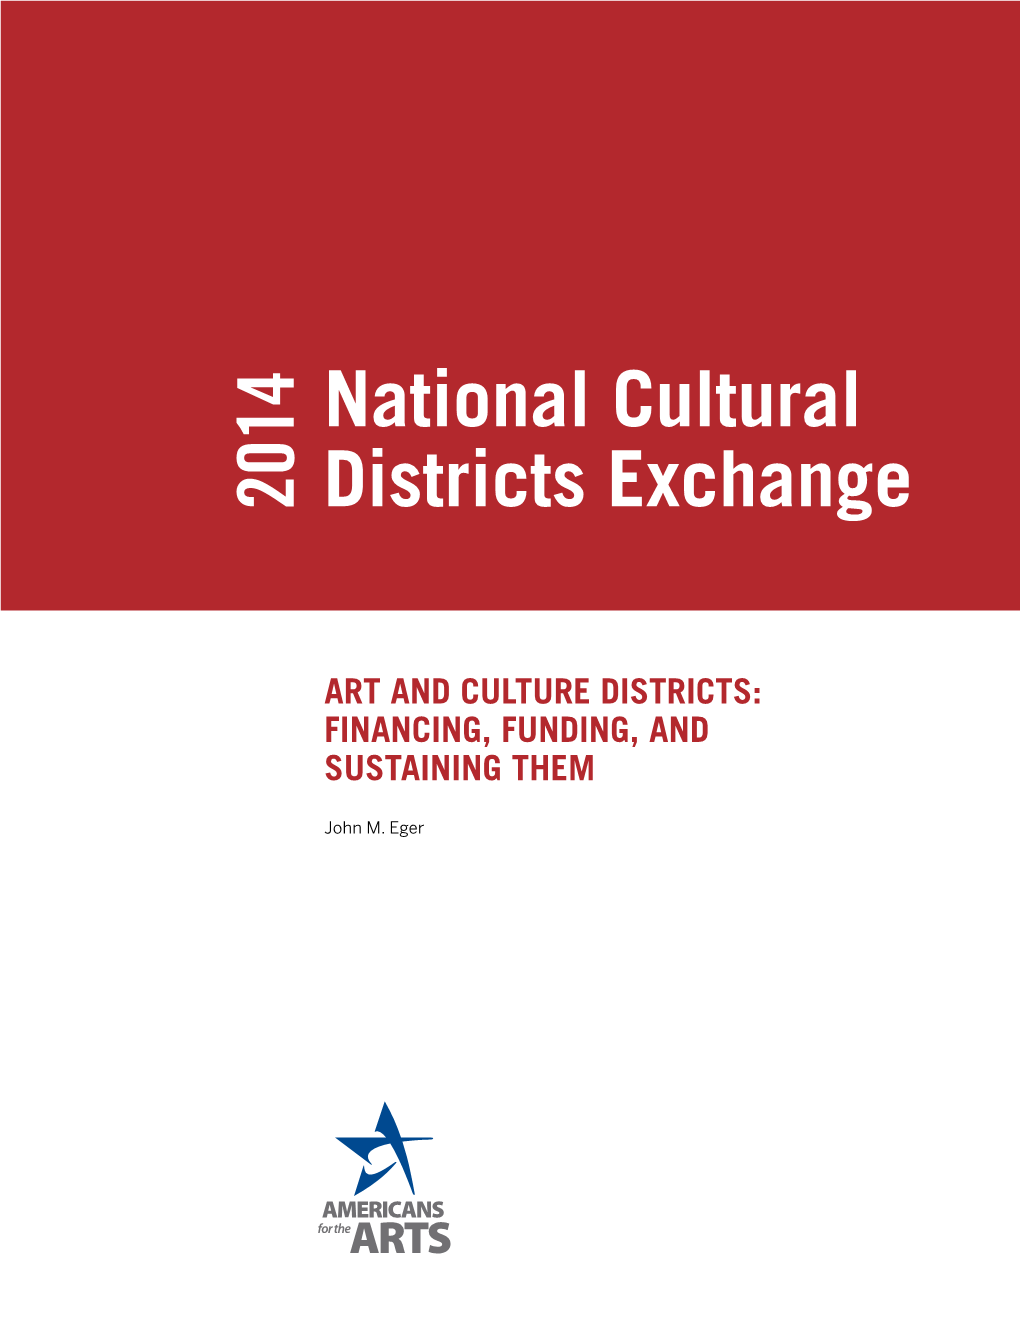 National Cultural Districts Exchange